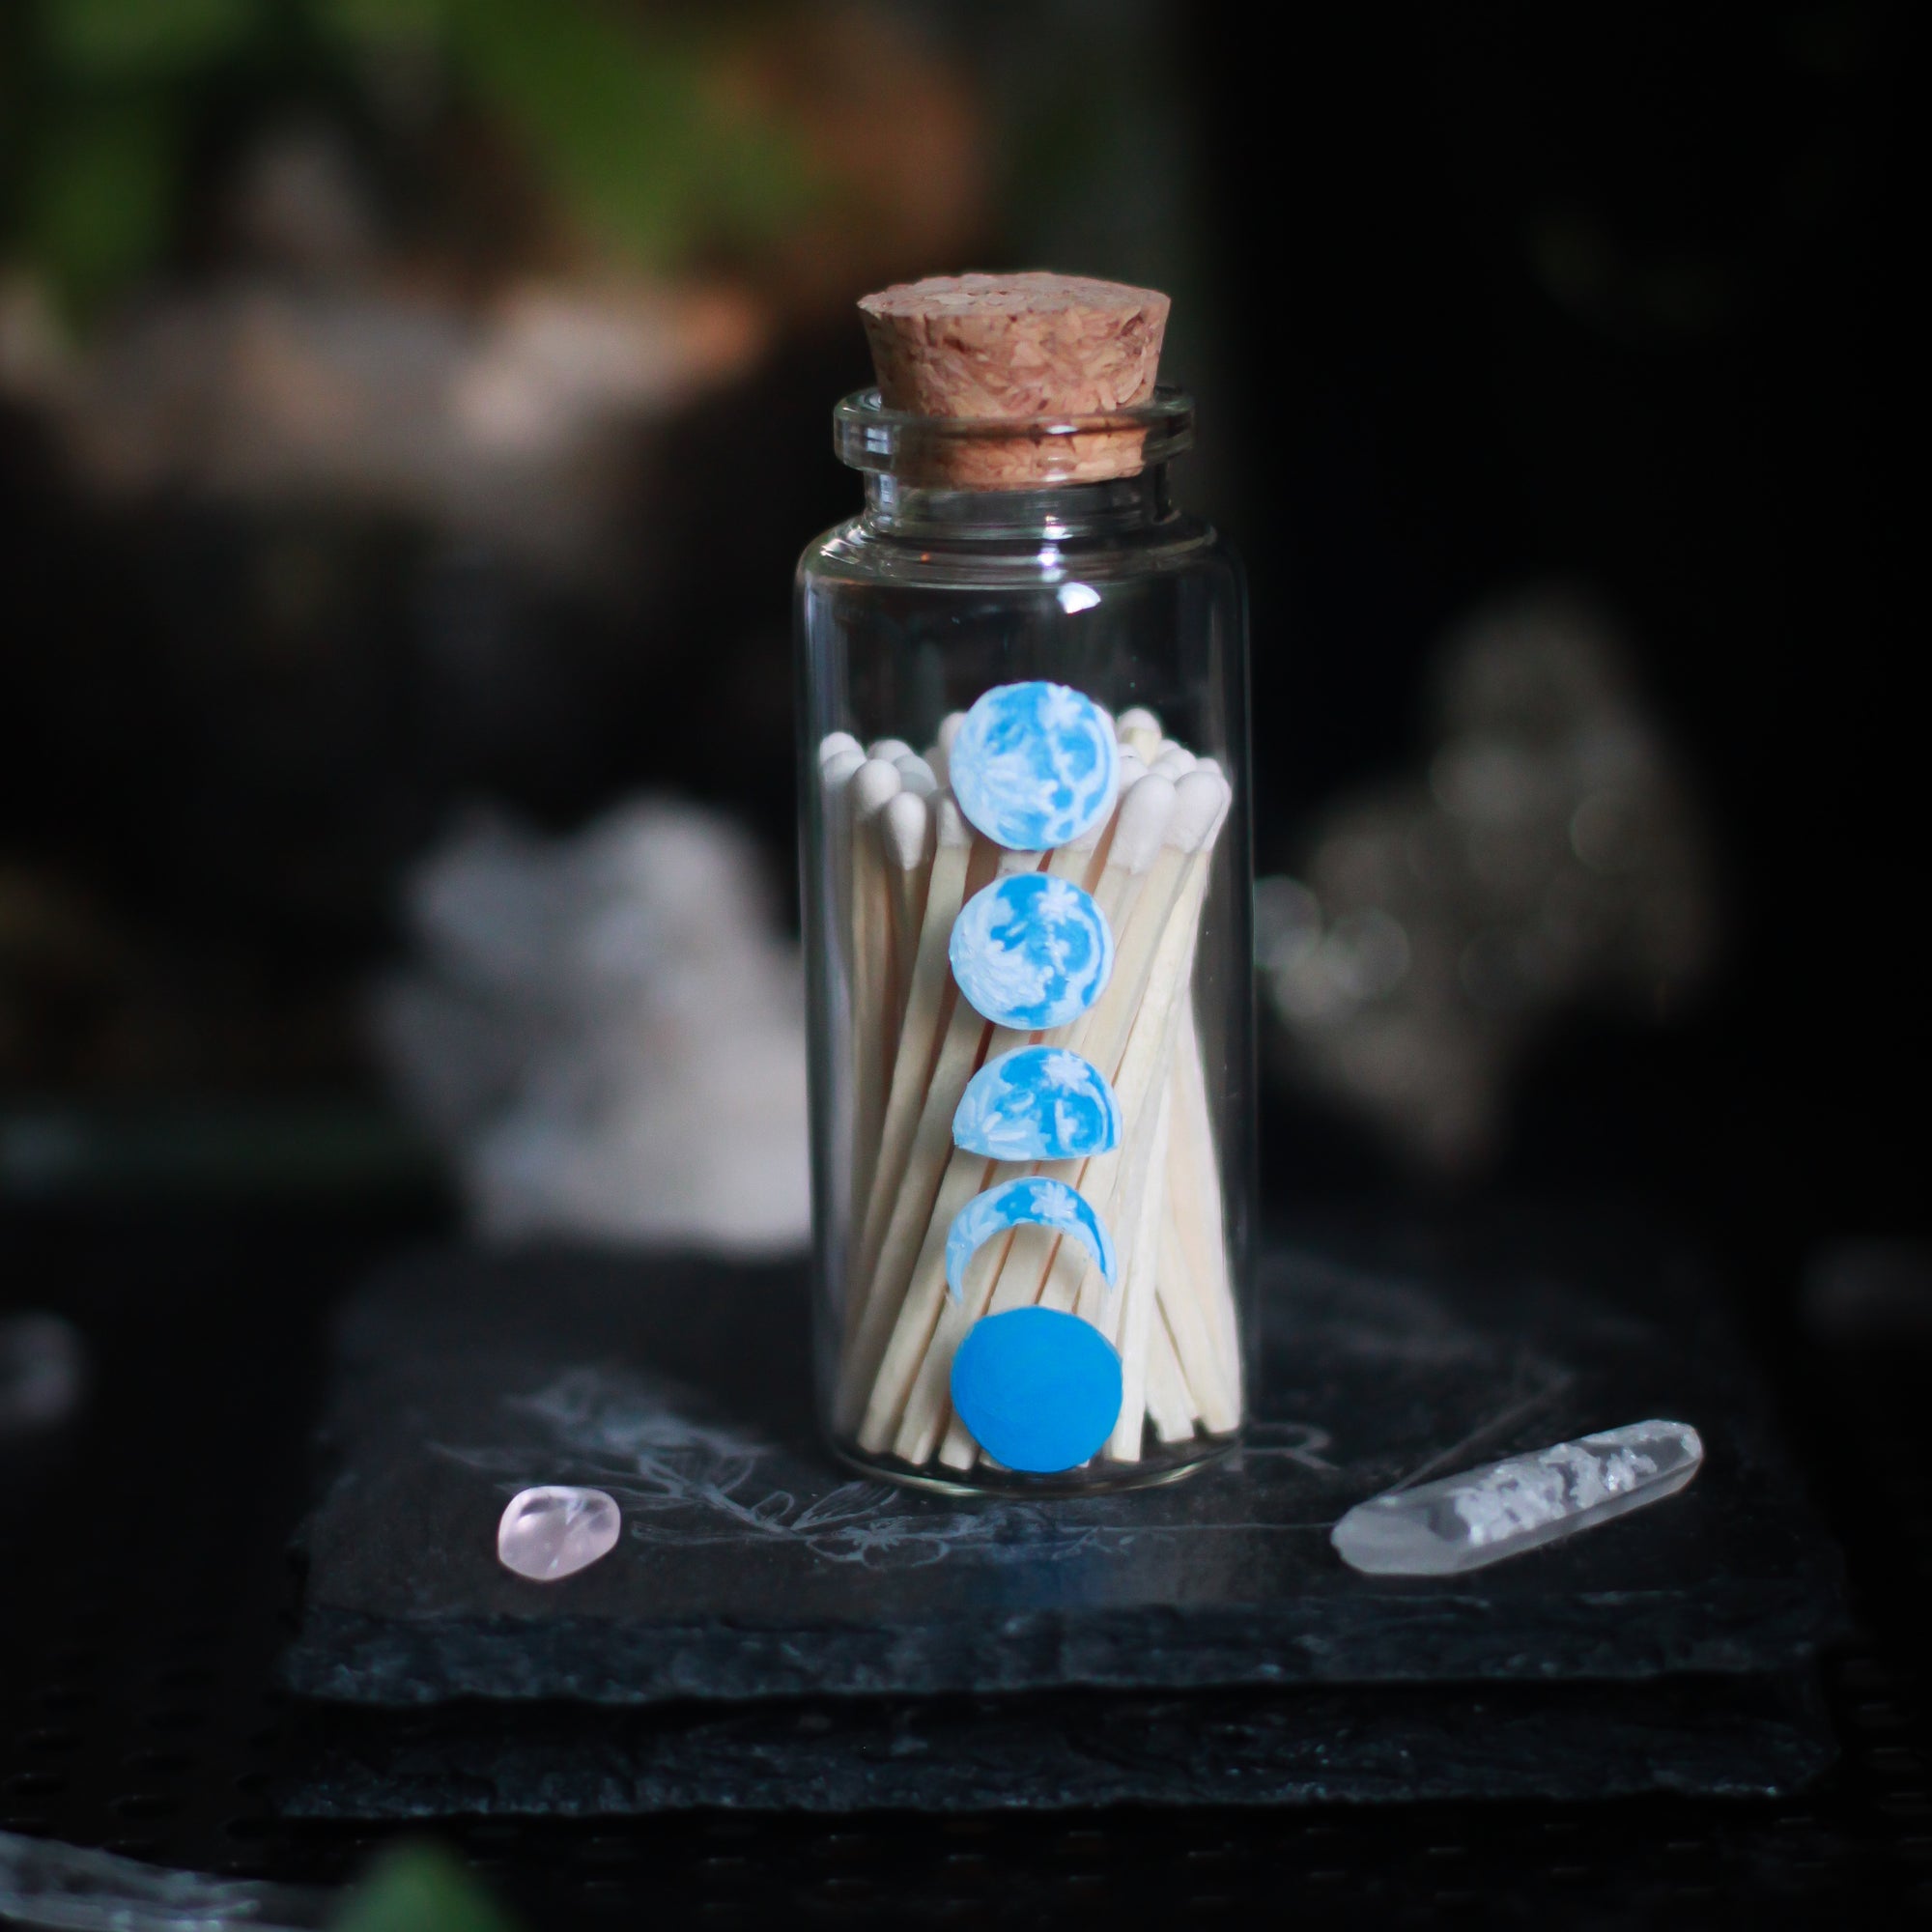 A small glass bottle, 2.75" tall and 1.18" in diameter, rests upon a dark surface and background with some crystals and plants visible in the scene. The bottle has 5 phases of the moon painted in blue, painted vertically on the front of the bottle. The bottle is filled with wooden matches with white tops.